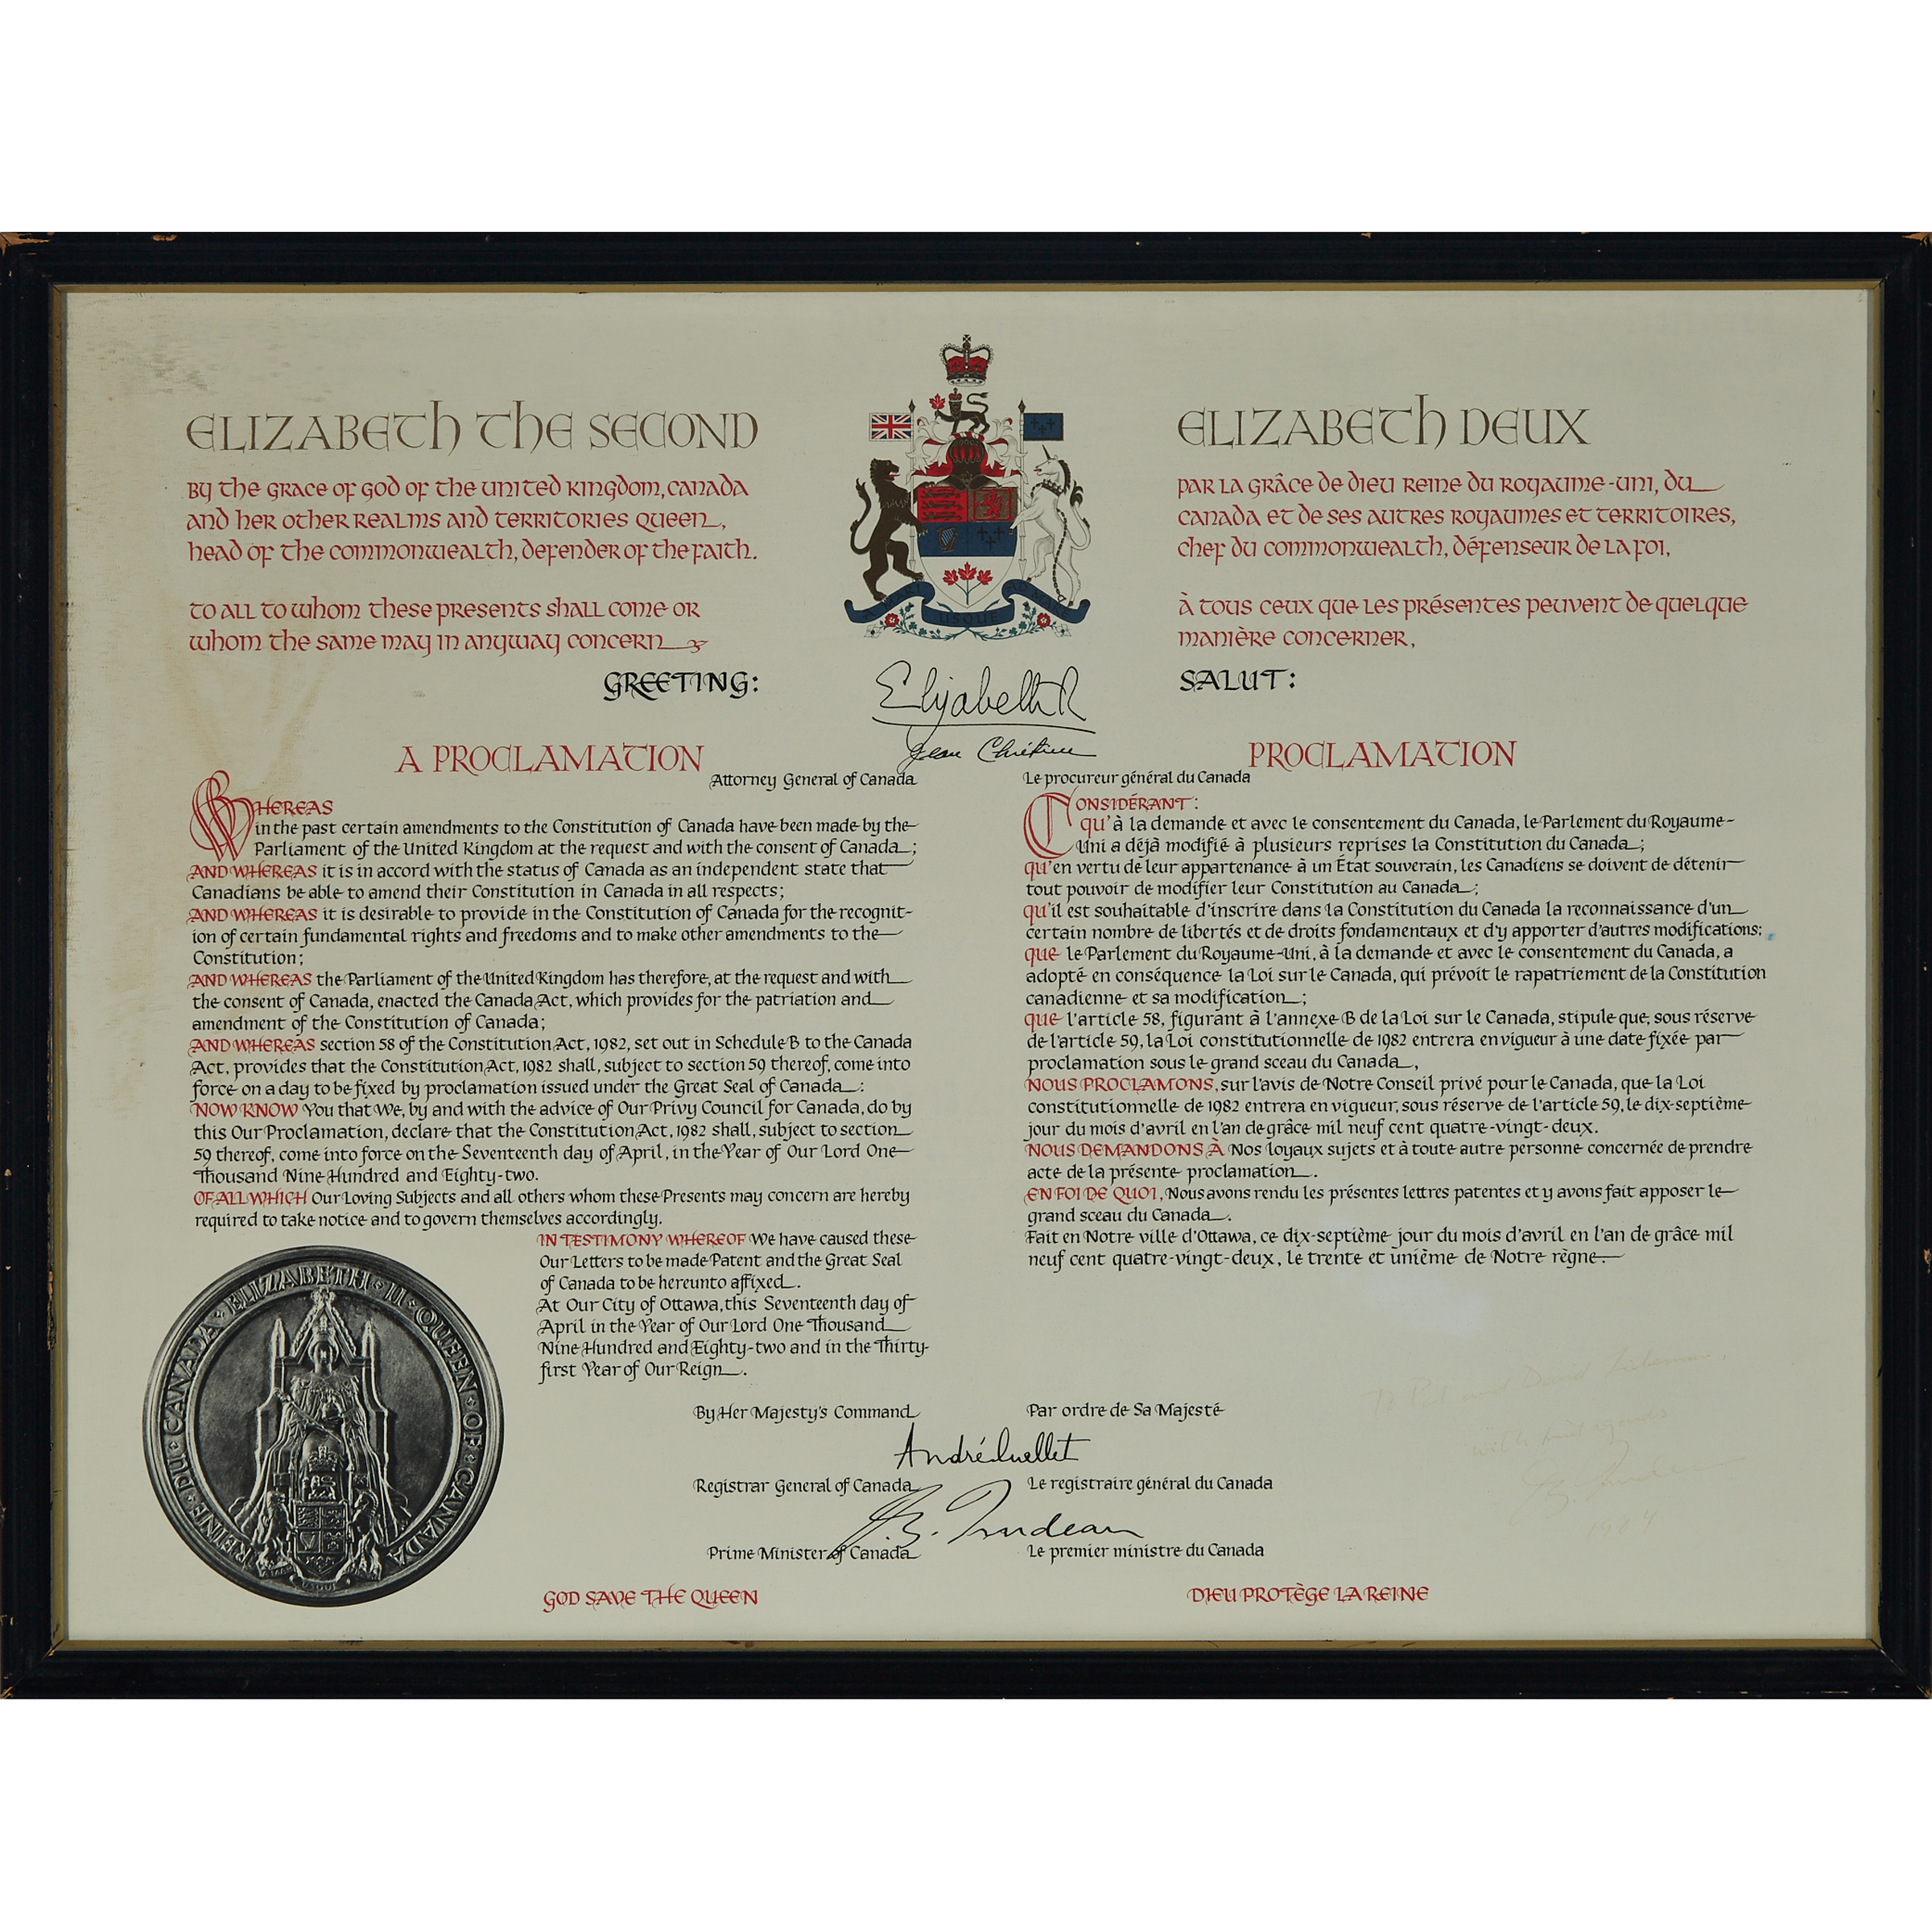 Facsimile of Elizabeth II Proclamation of the Canadian Constitution Act, 1982